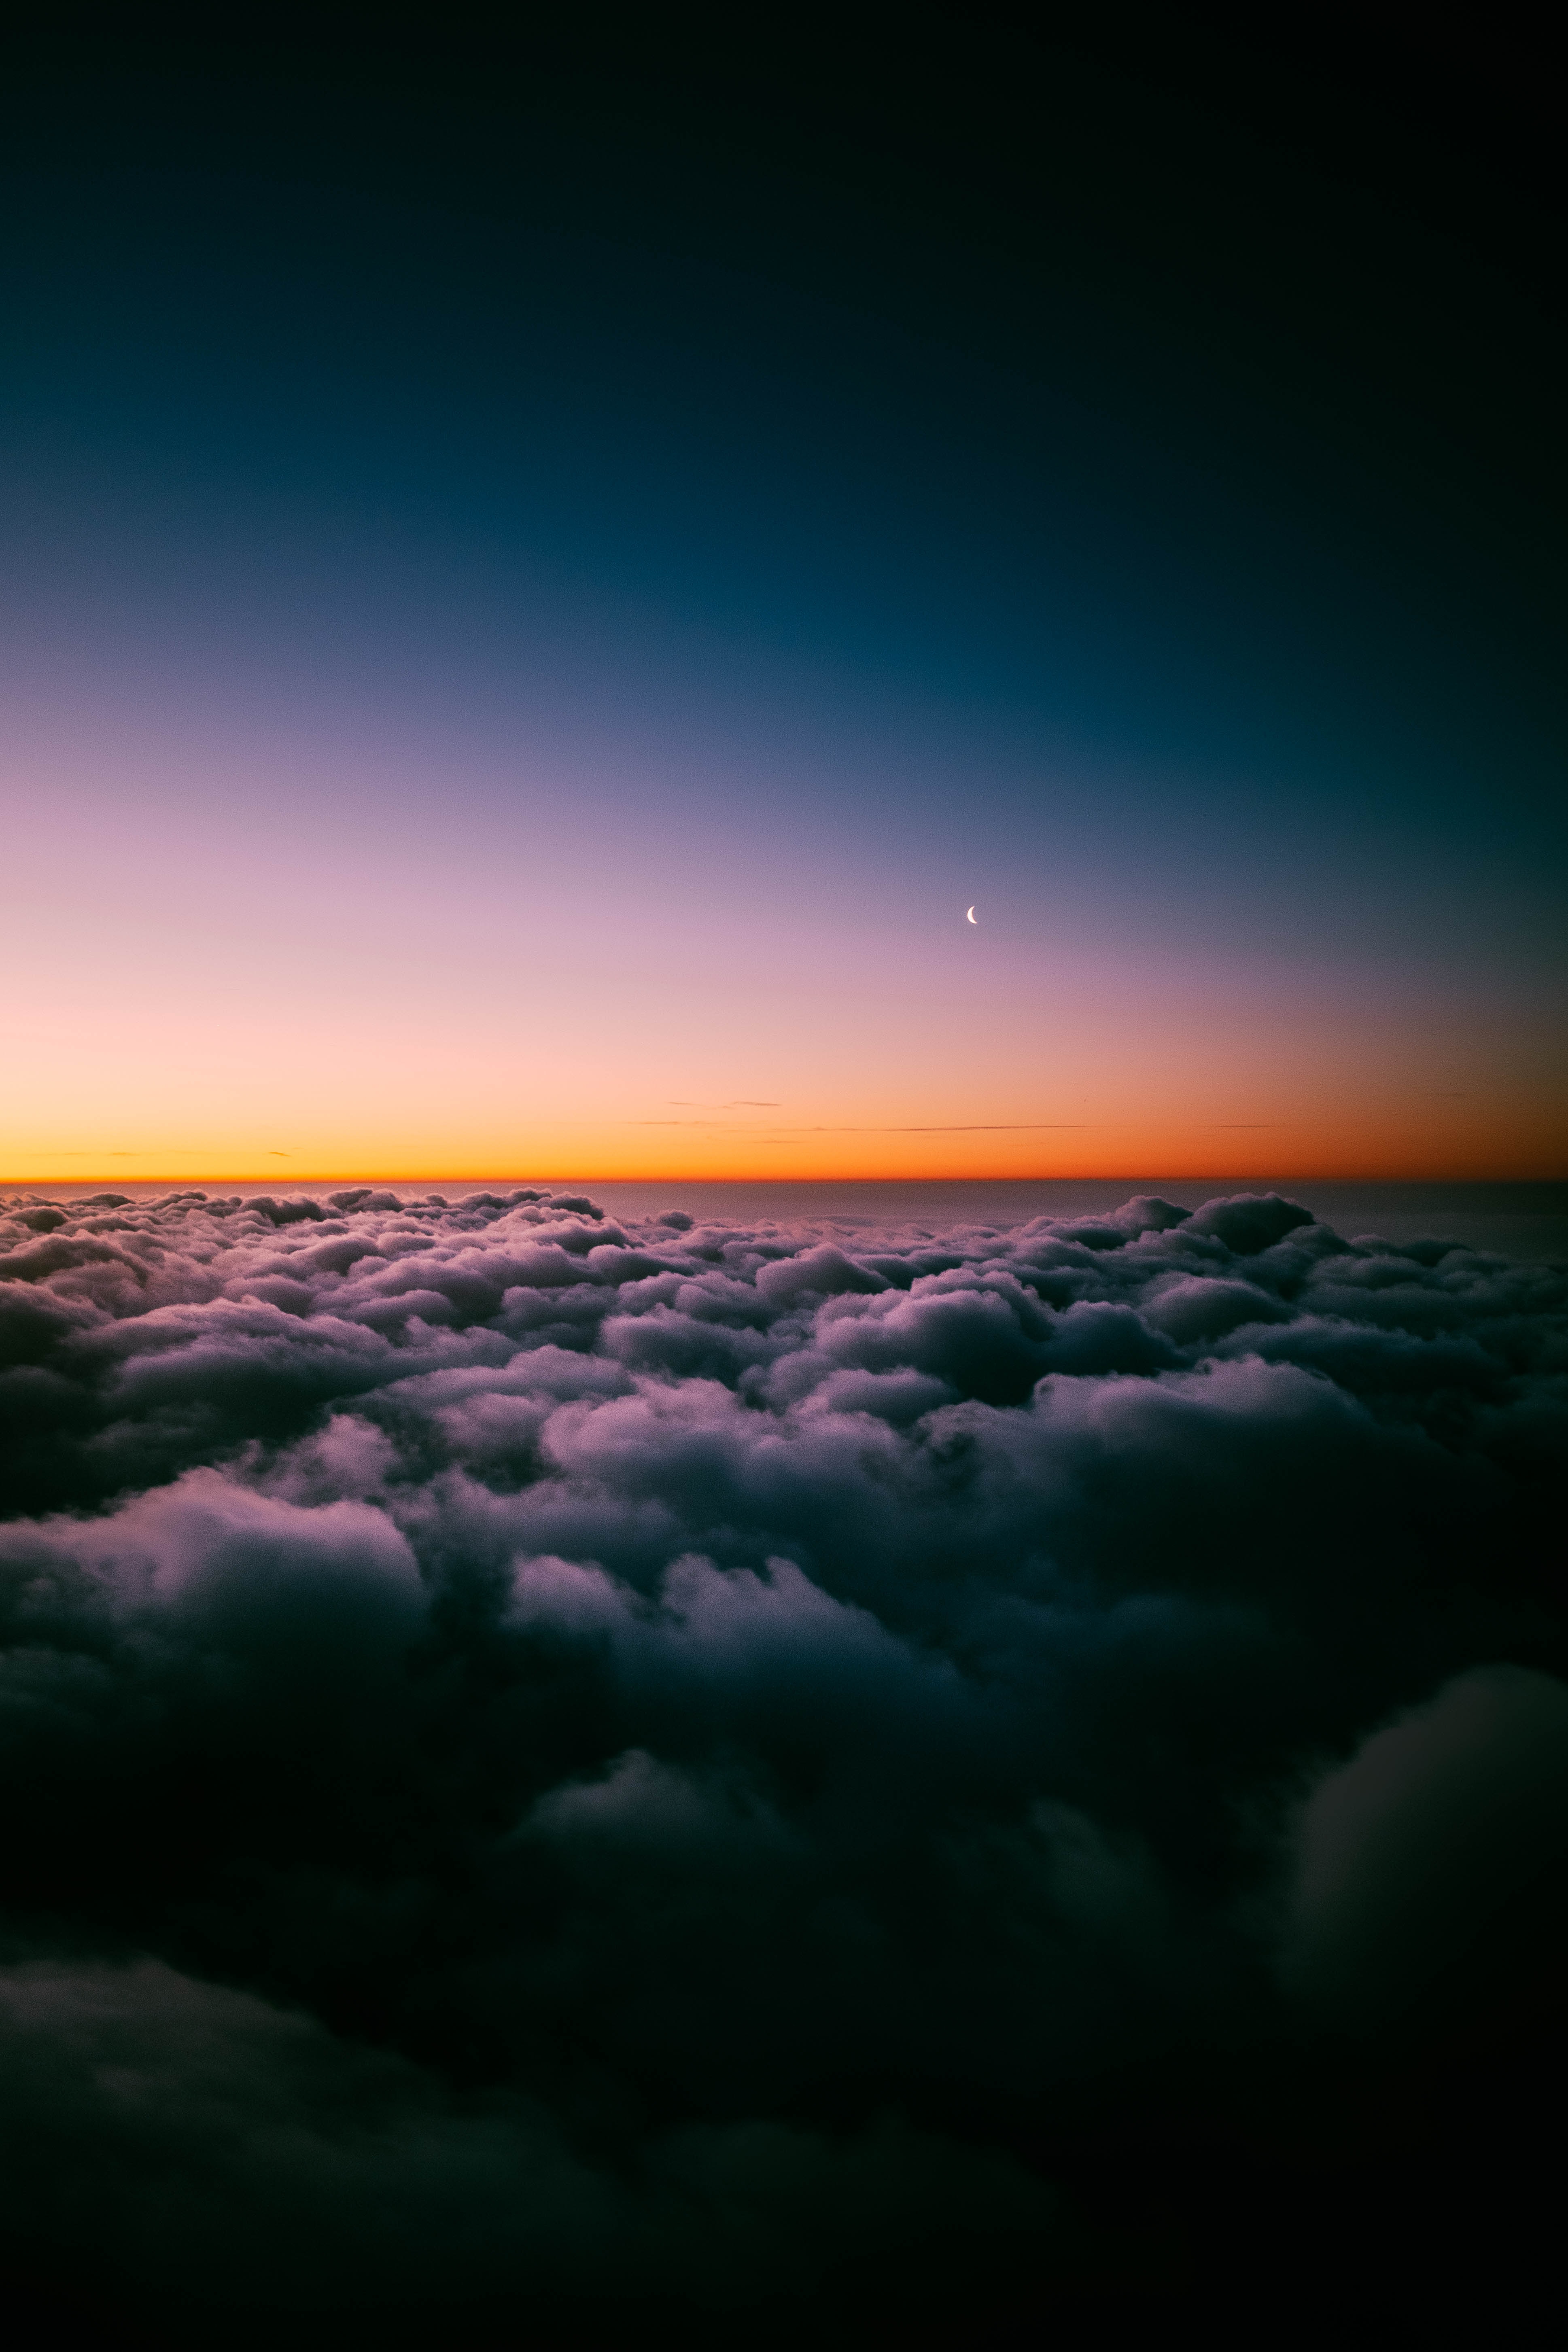 clouds, above the clouds, porous, moon, nature, sunset, twilight, dusk, sky horizon download HD wallpaper